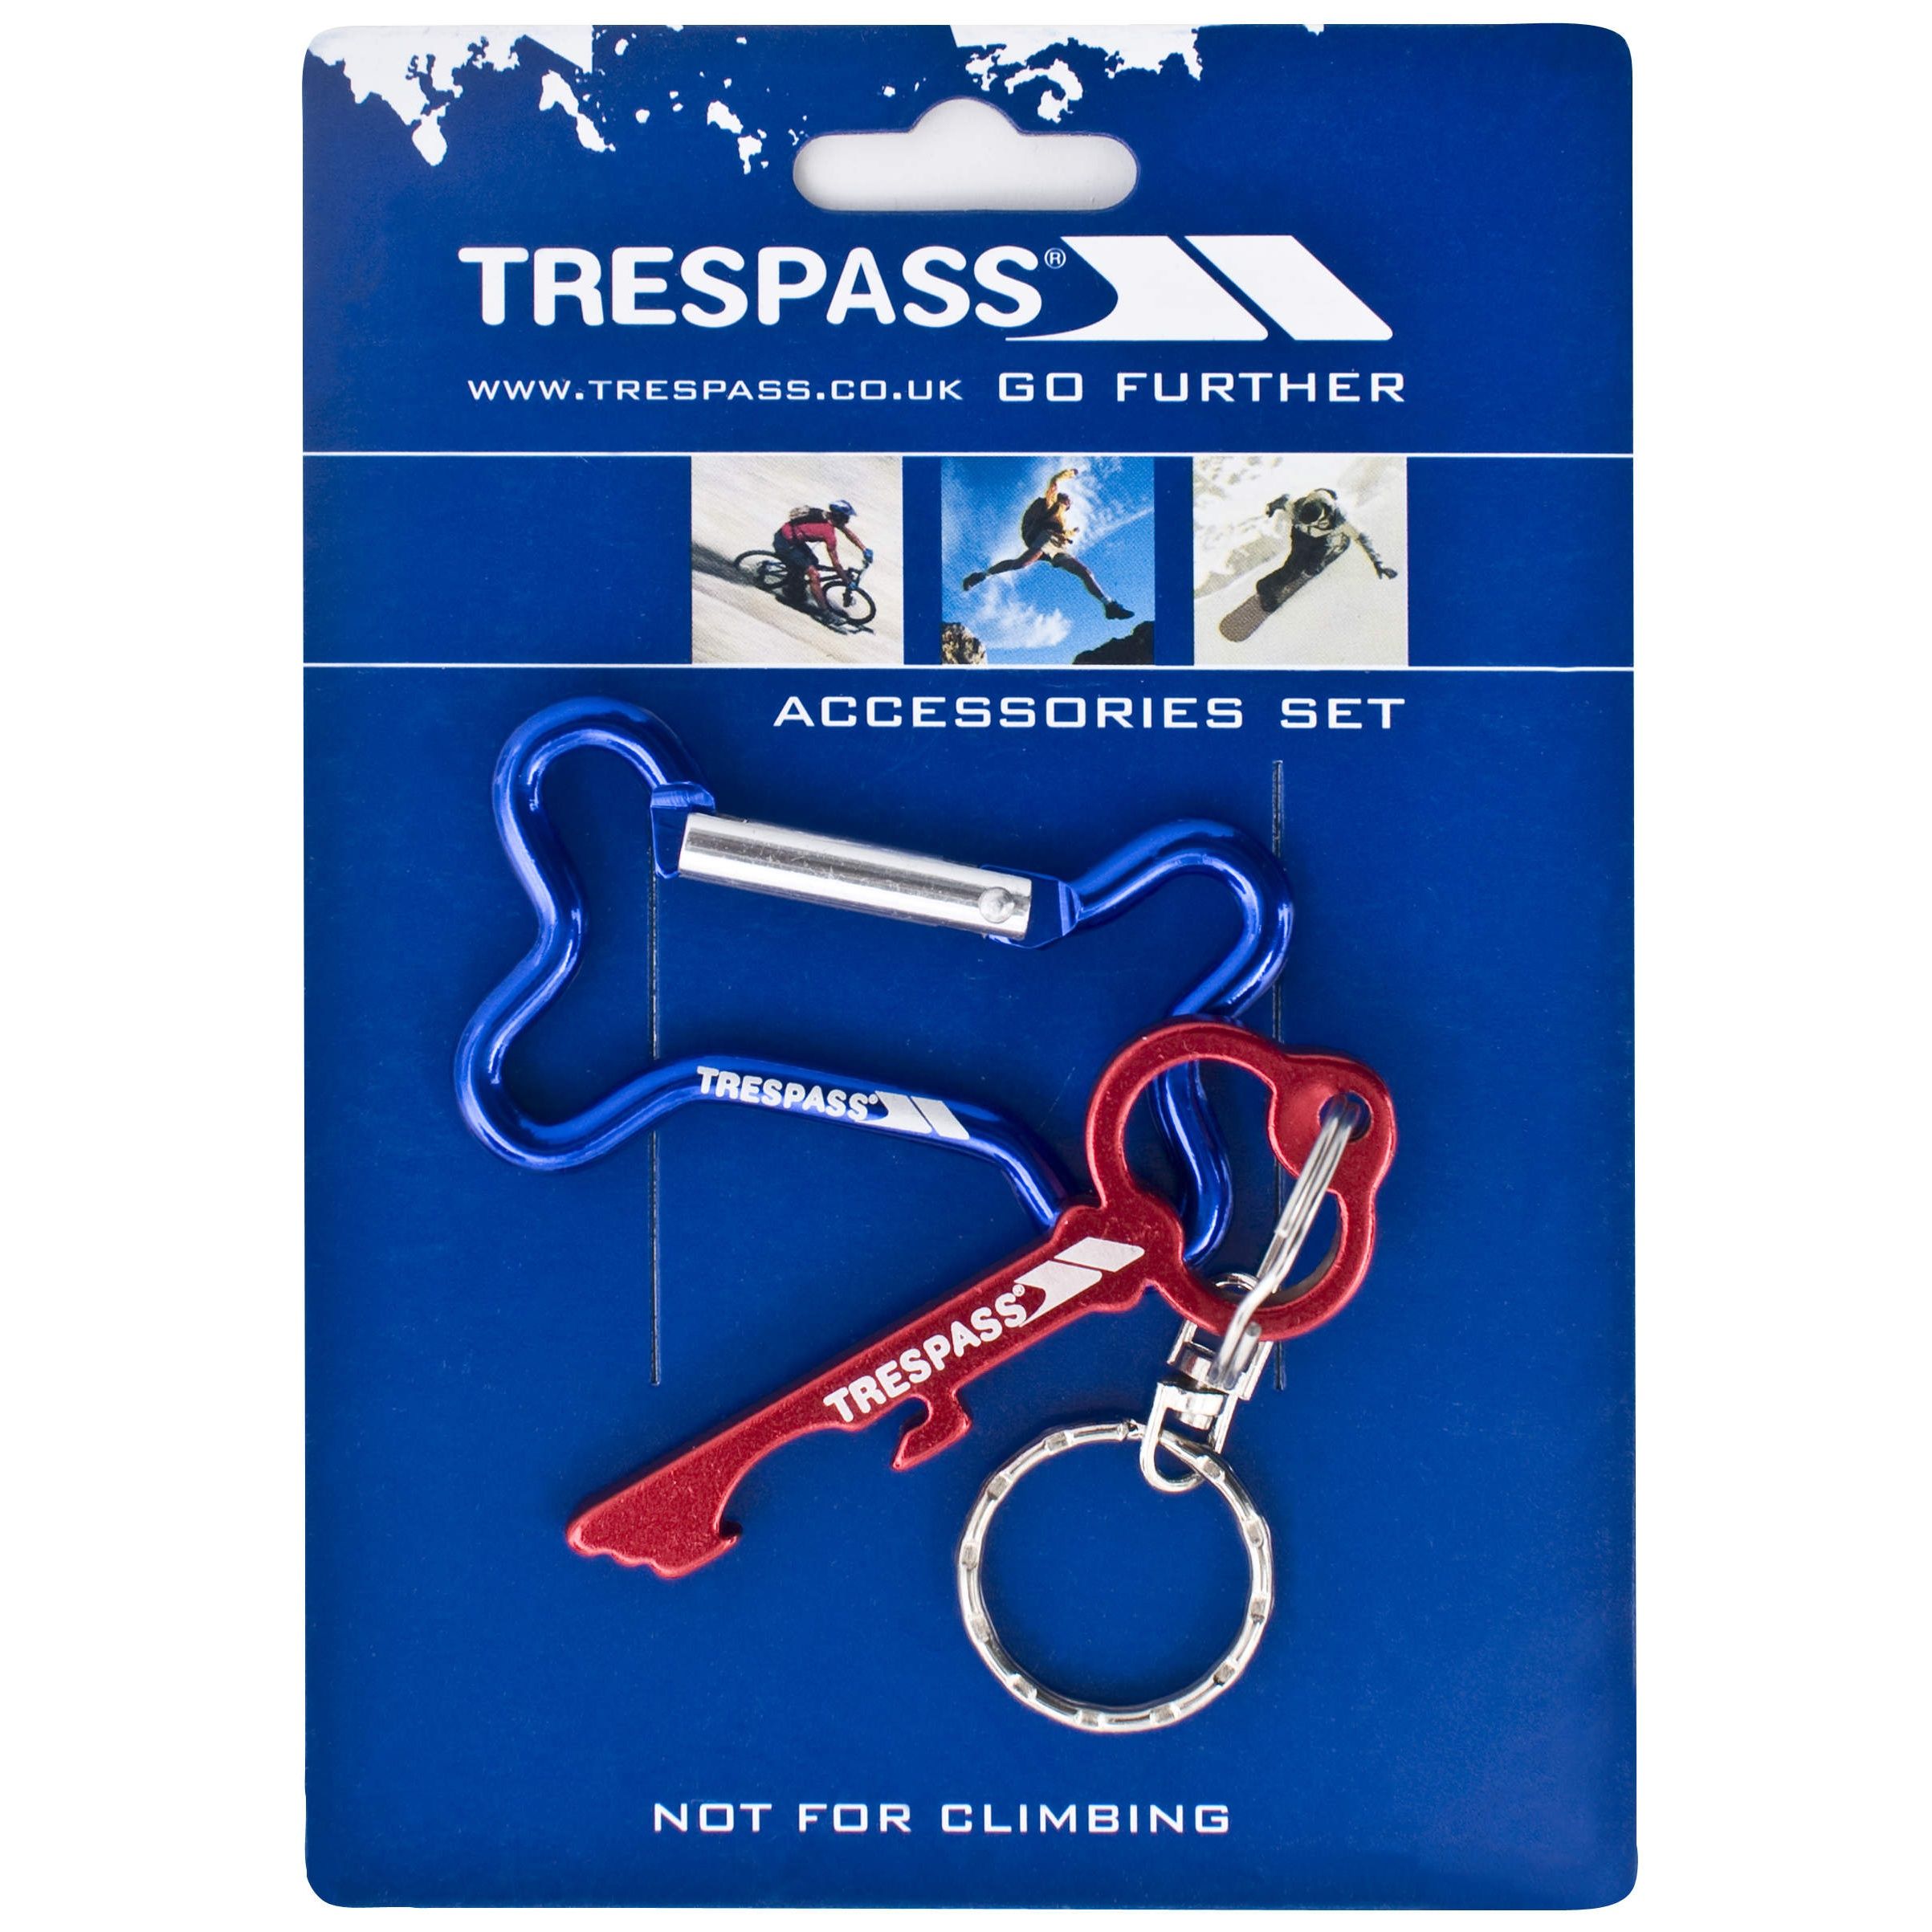 2 piece accessory set. Trespass branded. Not suitable for climbing.